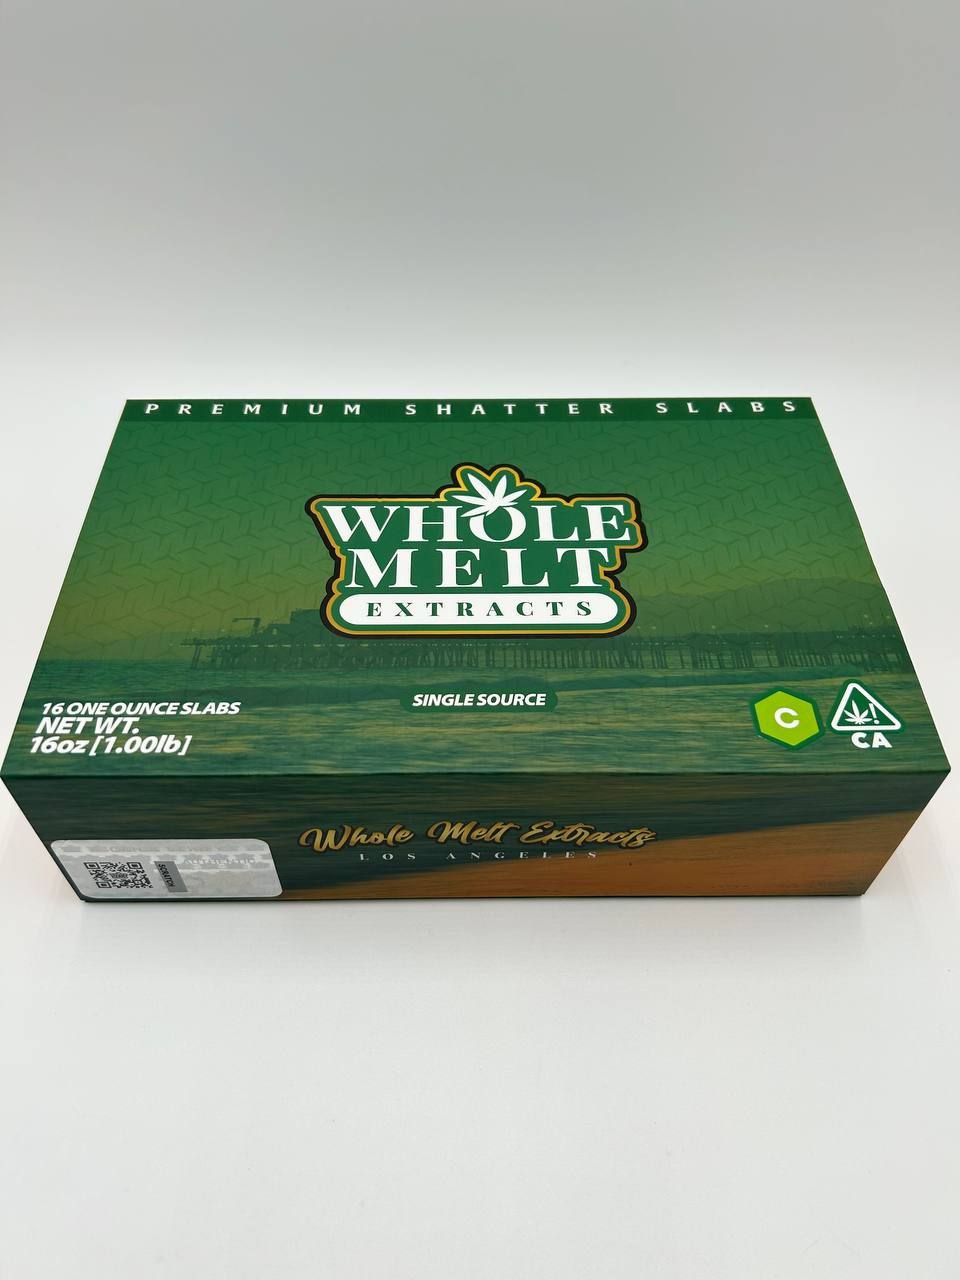 A packaged box of "Import placeholder for 45" labeled as "Premium Shatter Slabs." The box is colored green and gold with the brand's logo prominently displayed. The text on the box indicates a net weight of 16 ounces (1 pound).